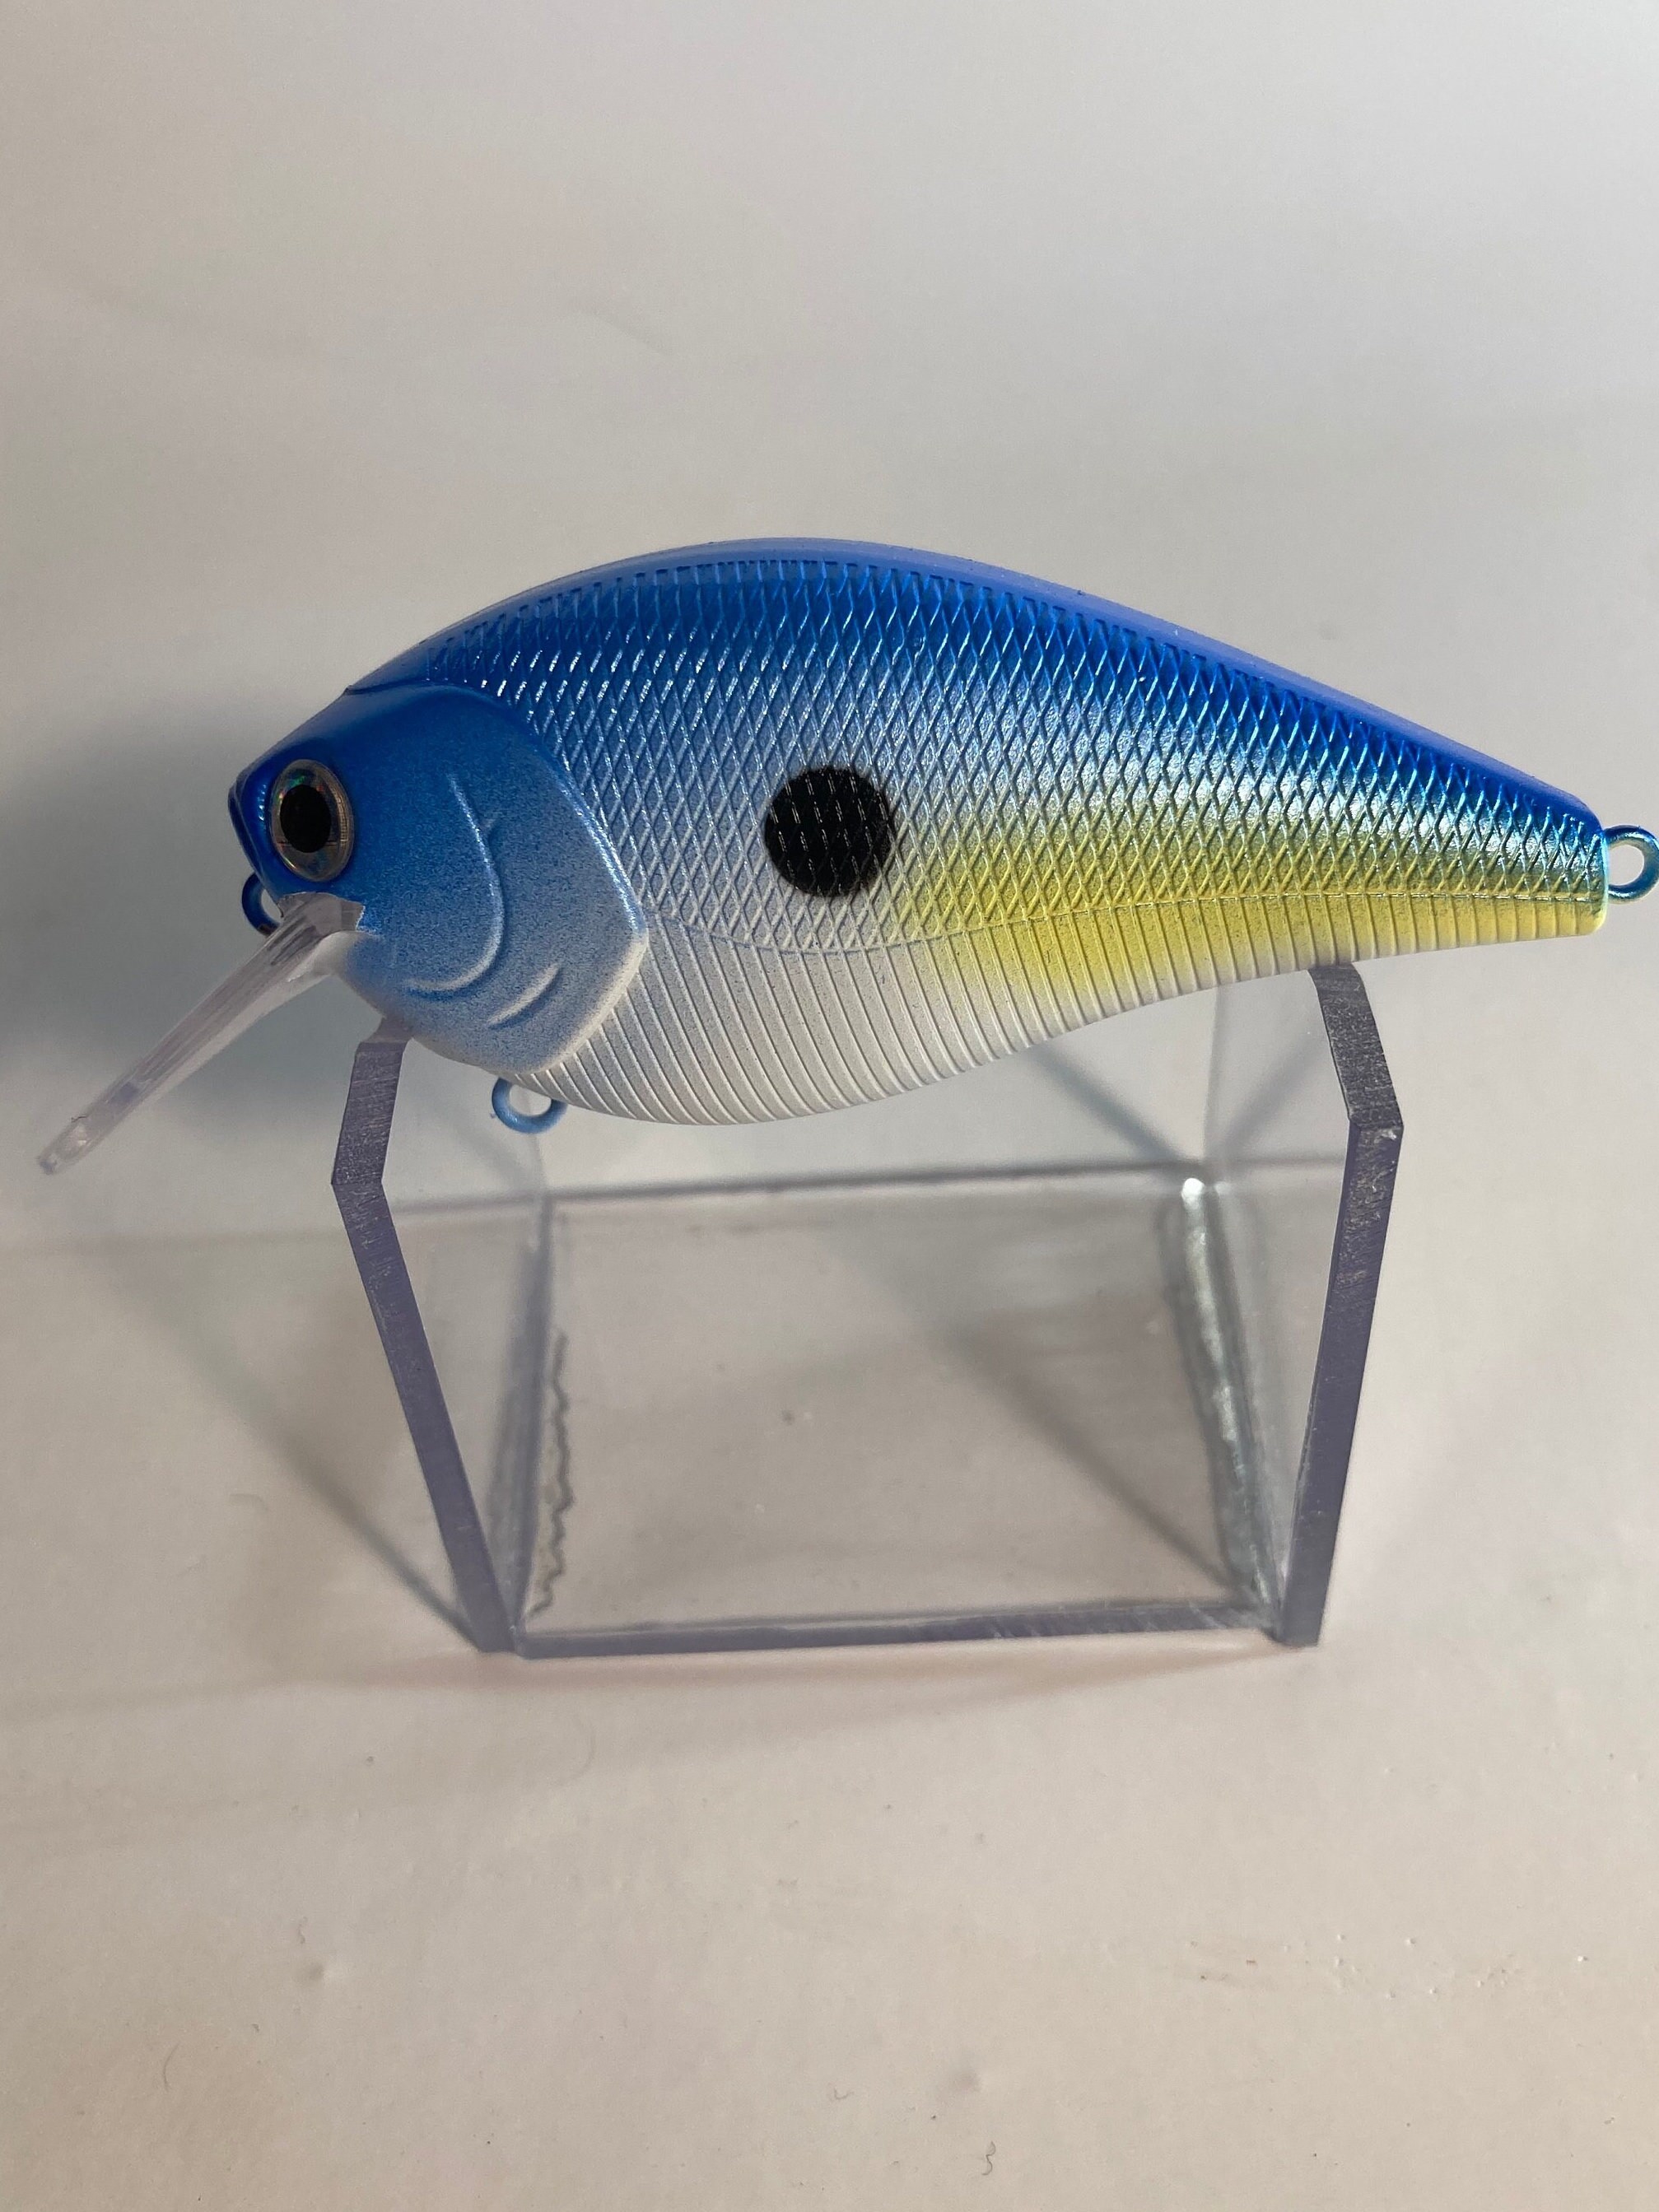 2.5 squarebill shallow diving crankbait with custom painted body